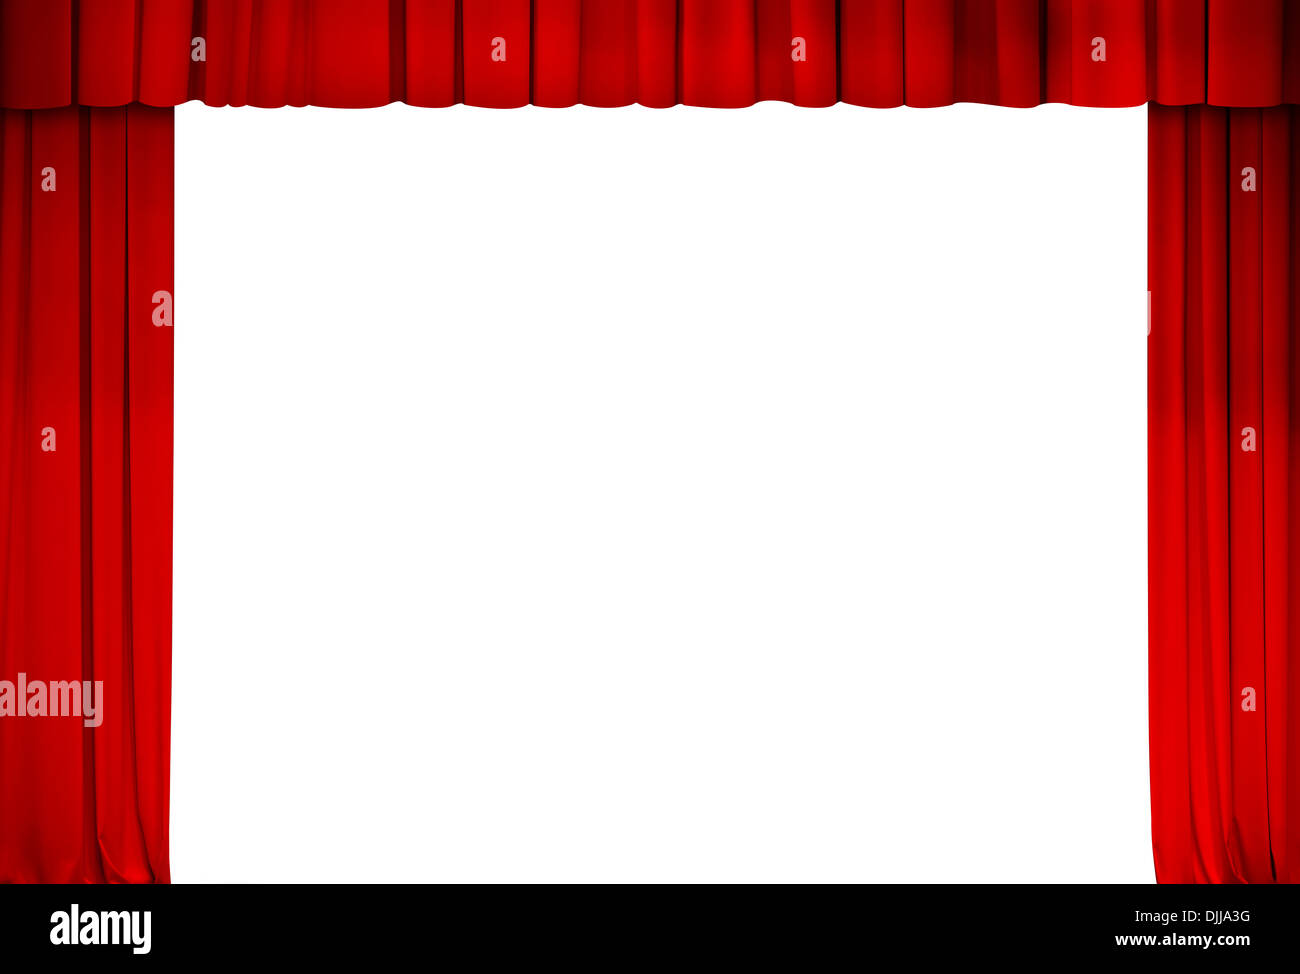 theatre red curtain frame isolate Stock Photo